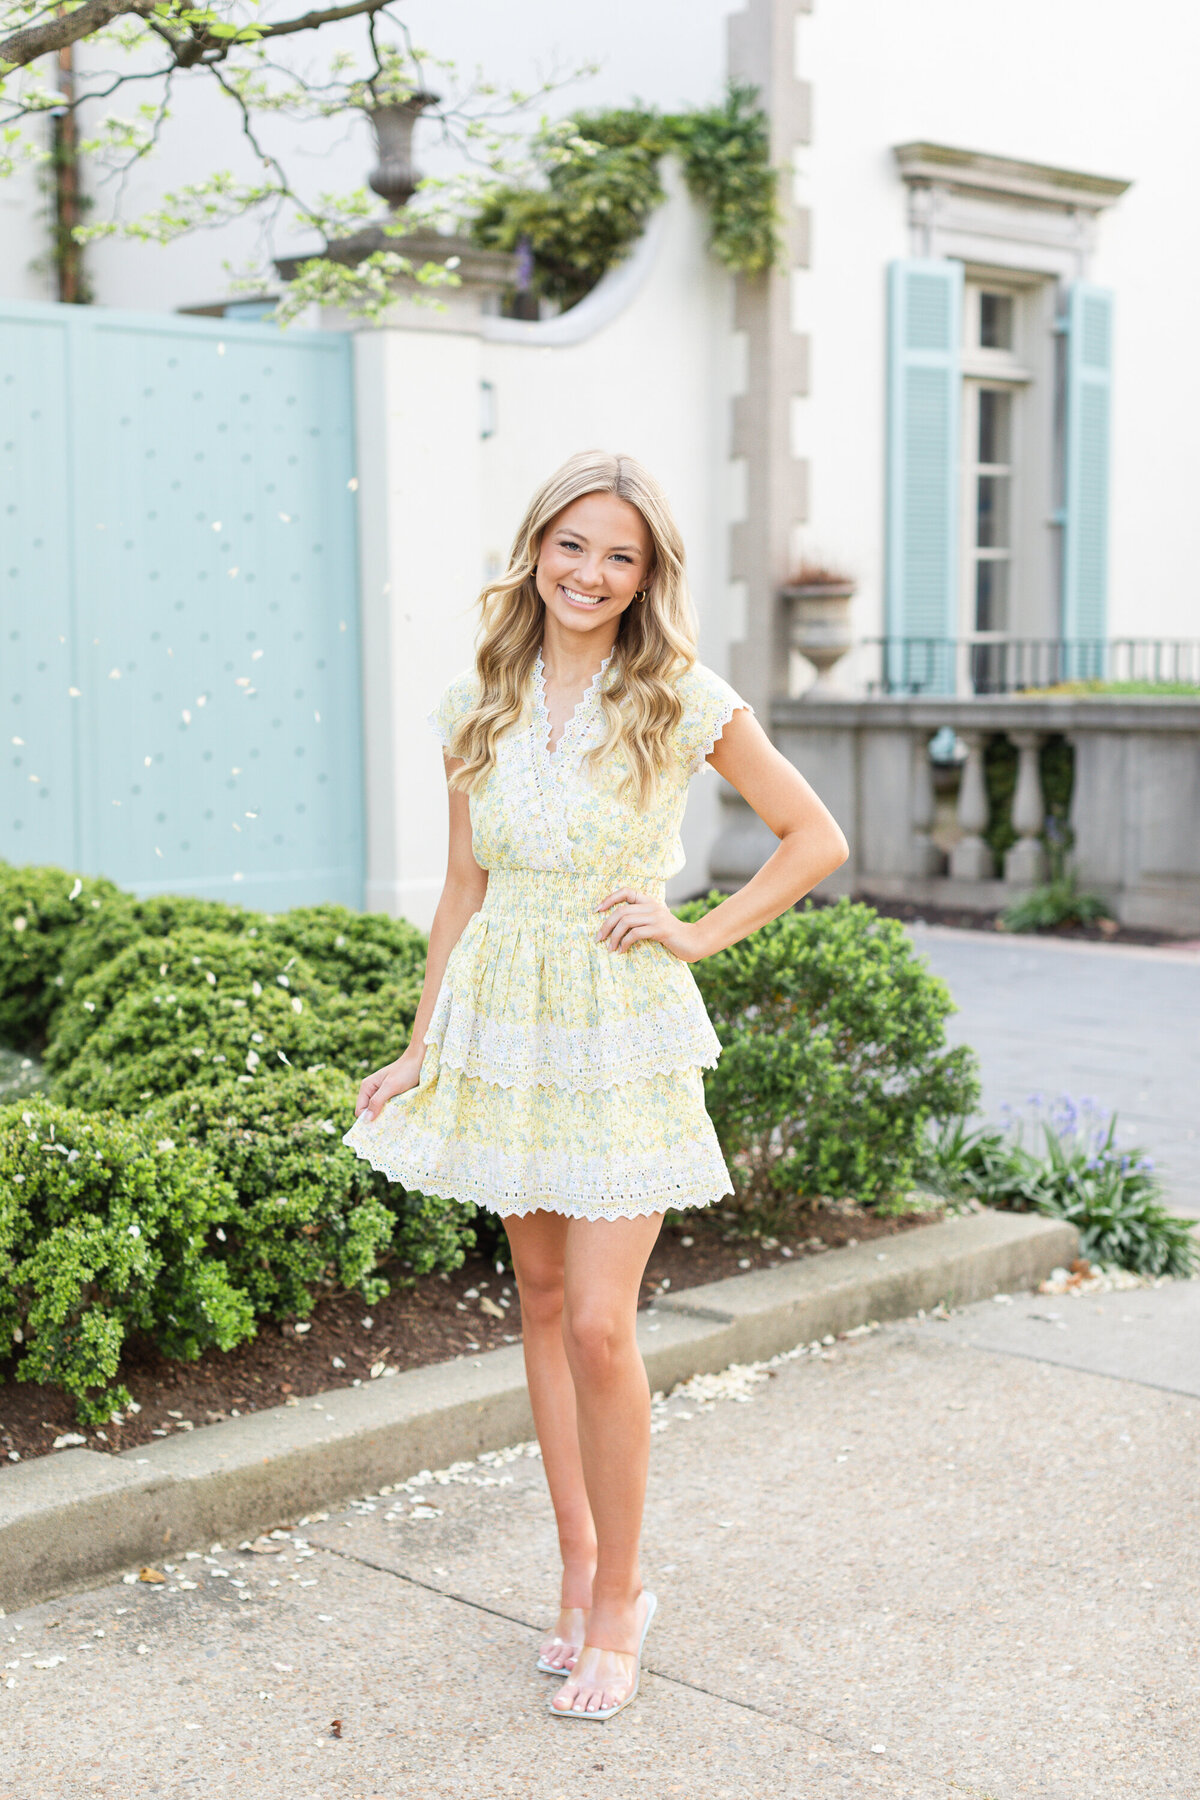 Dallas_Emily Bartell Photography-39